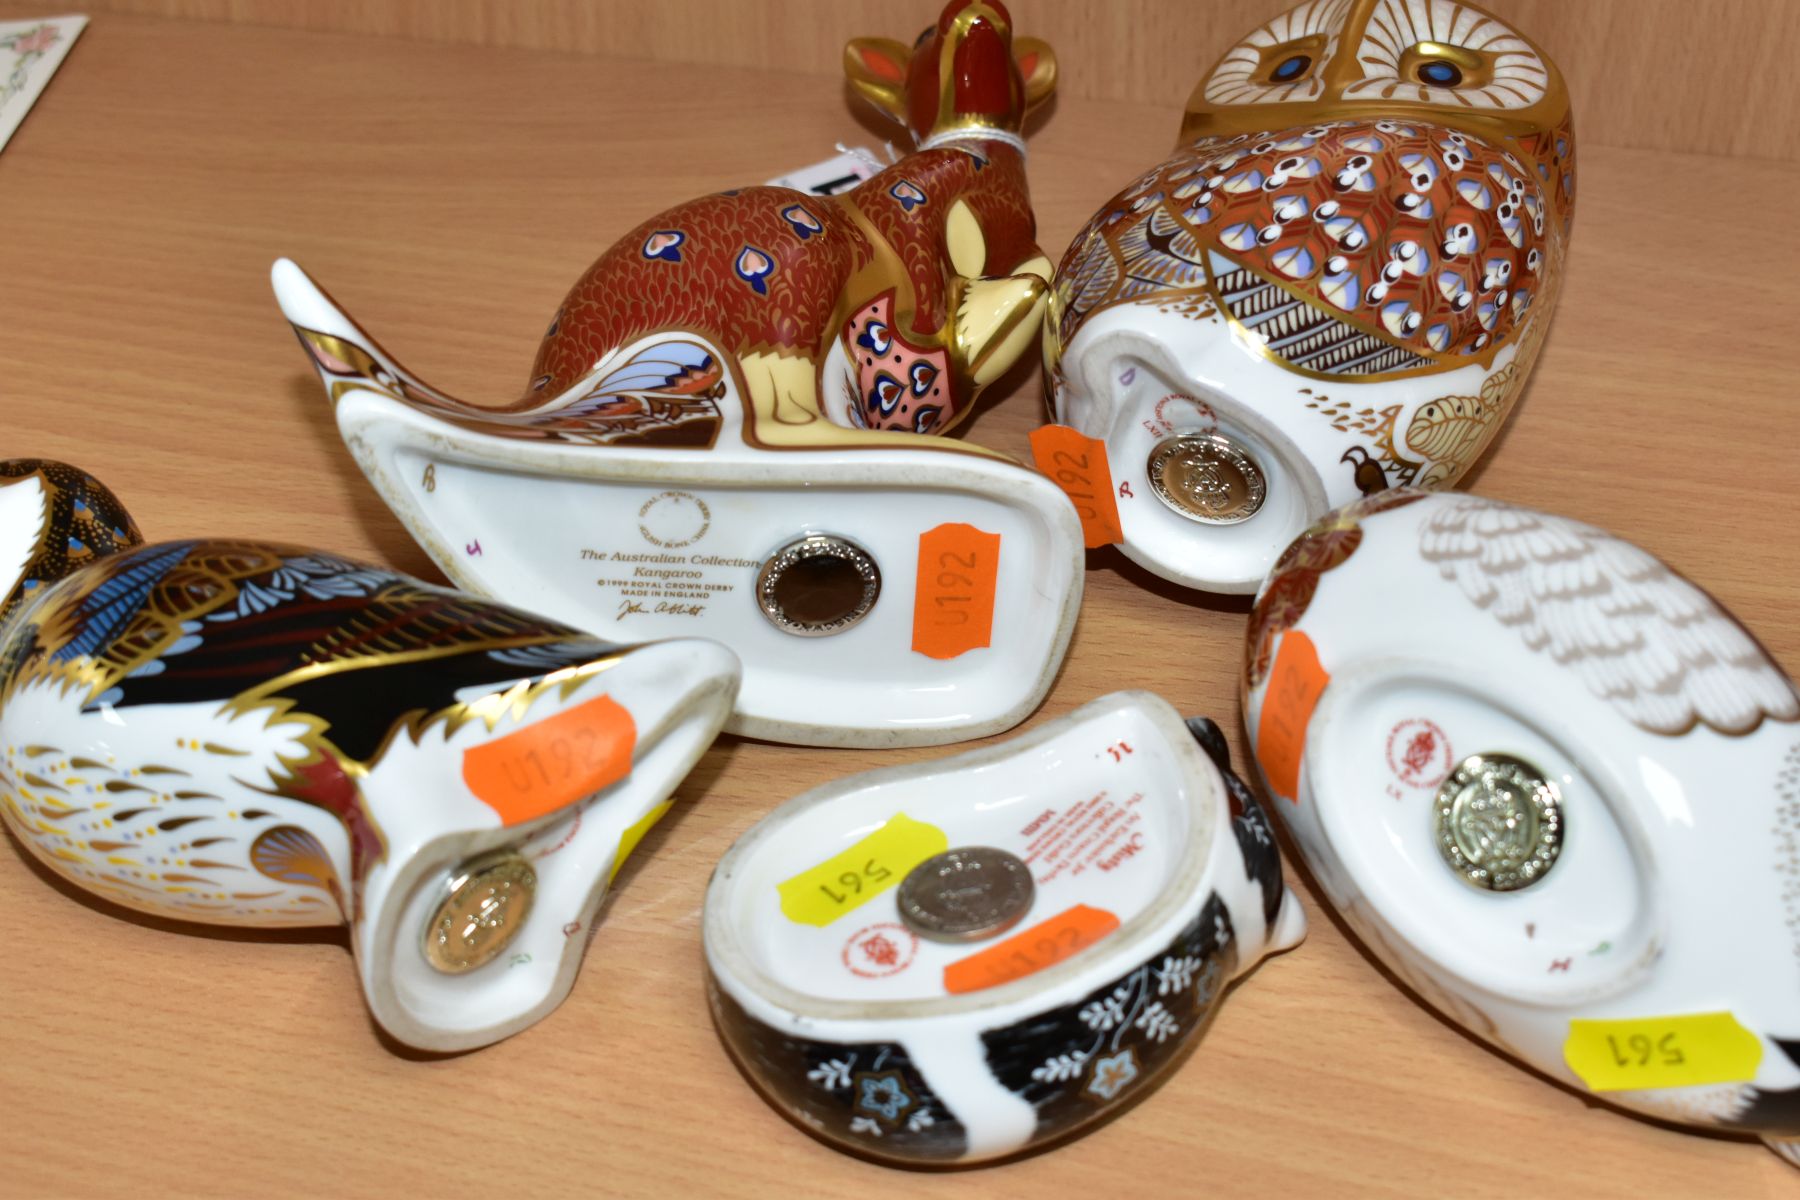 FIVE ROYAL CROWN DERBY SECONDS PAPERWEIGHTS, comprising Kangaroo from Australian Collection, Puffin, - Image 8 of 9